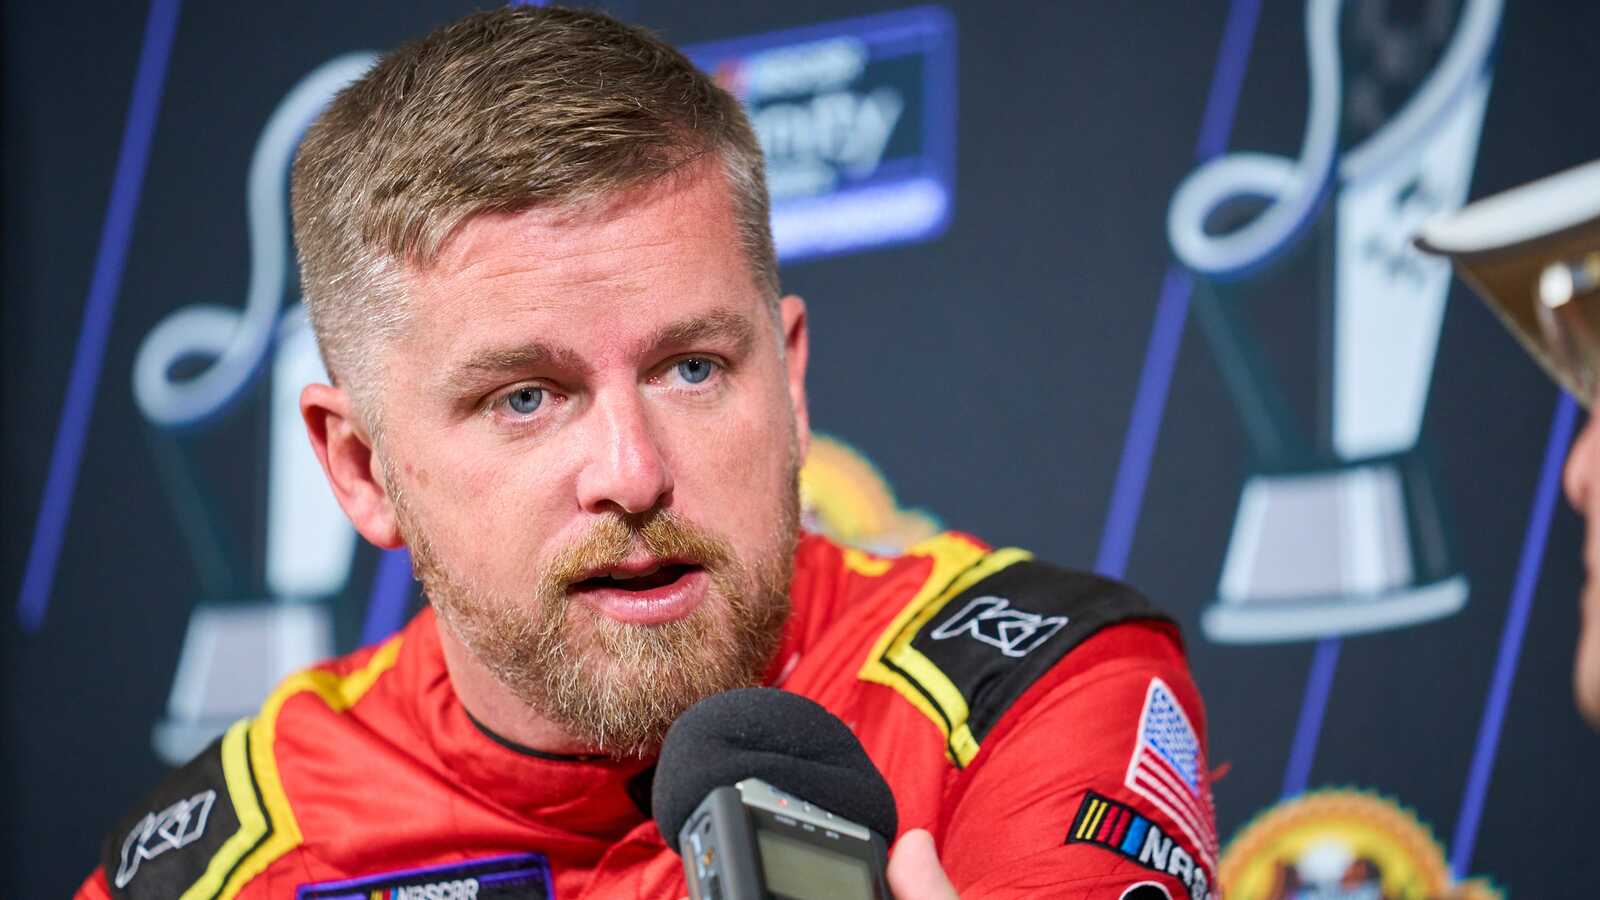 Justin Allgaier – Driven by desire, fueled by family